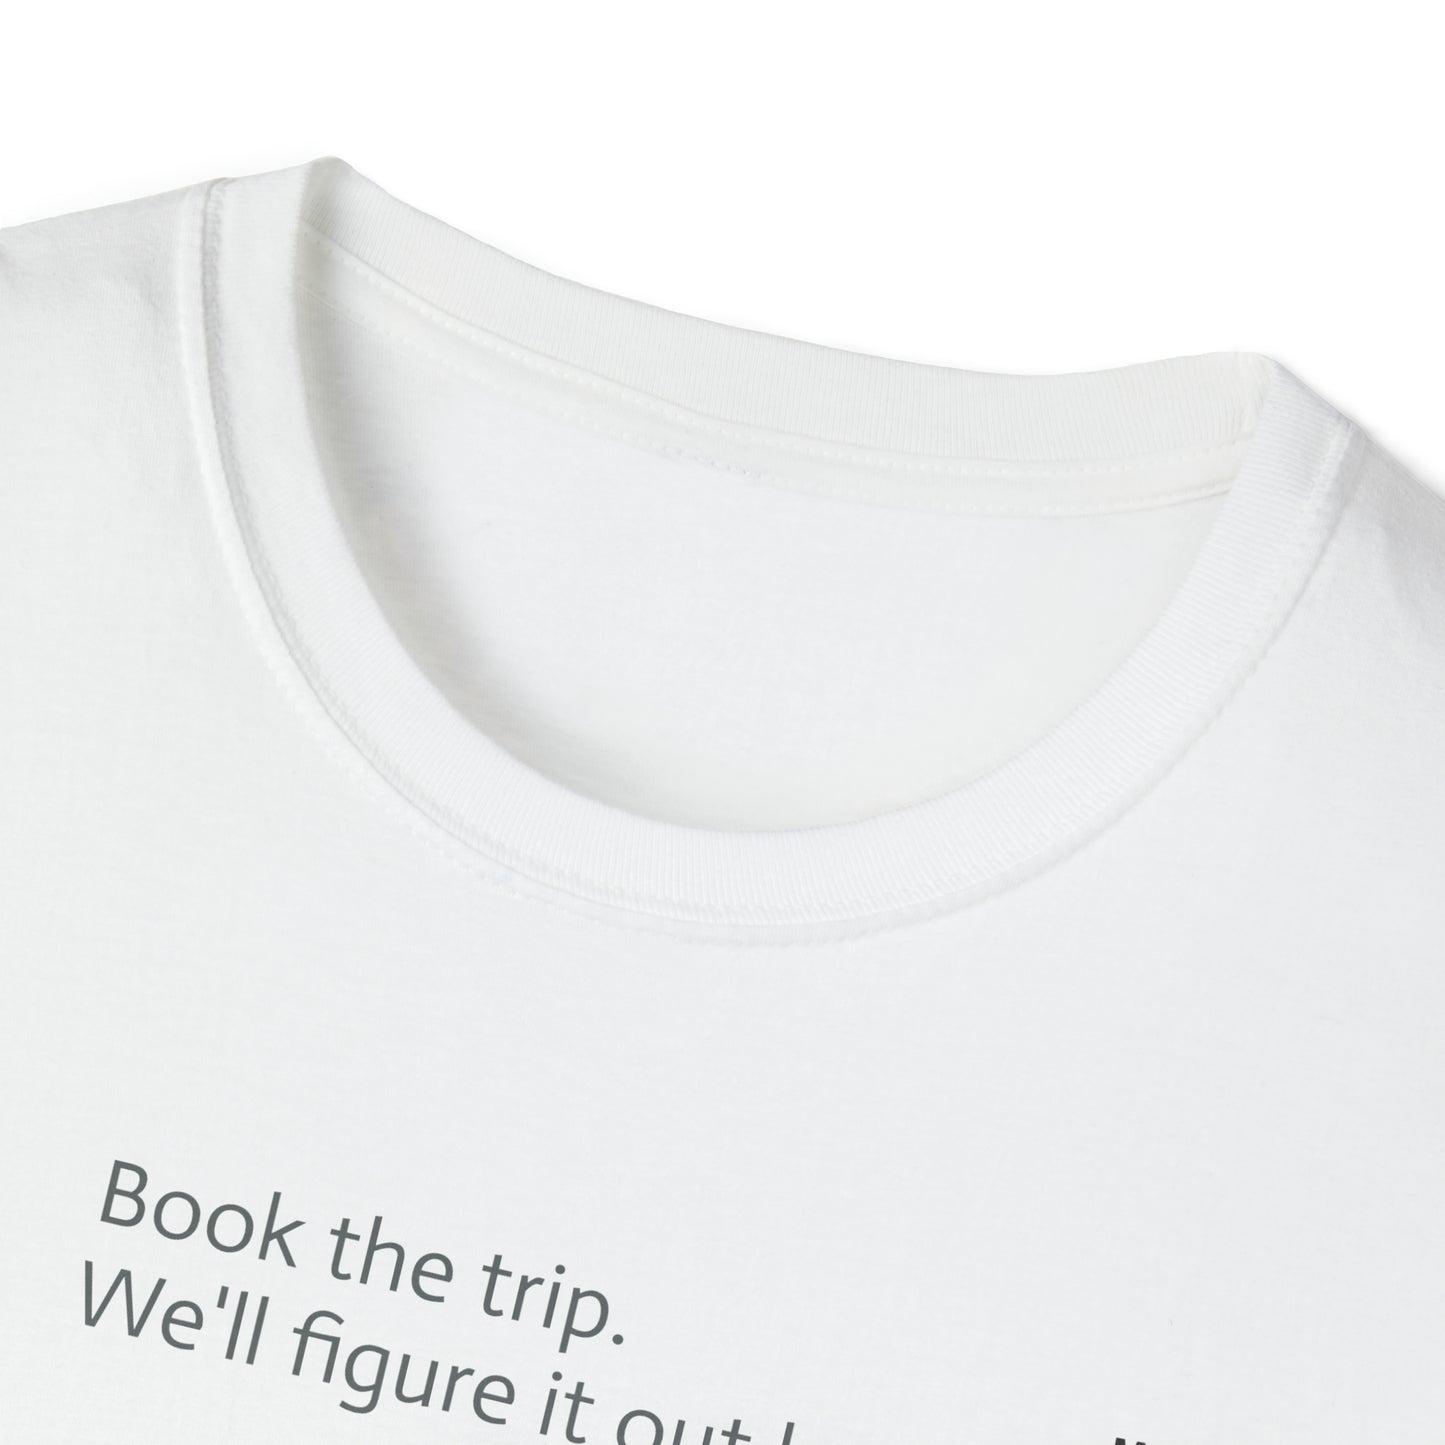 Book the trip. We'll figure it out later. Unisex Softstyle T-Shirt